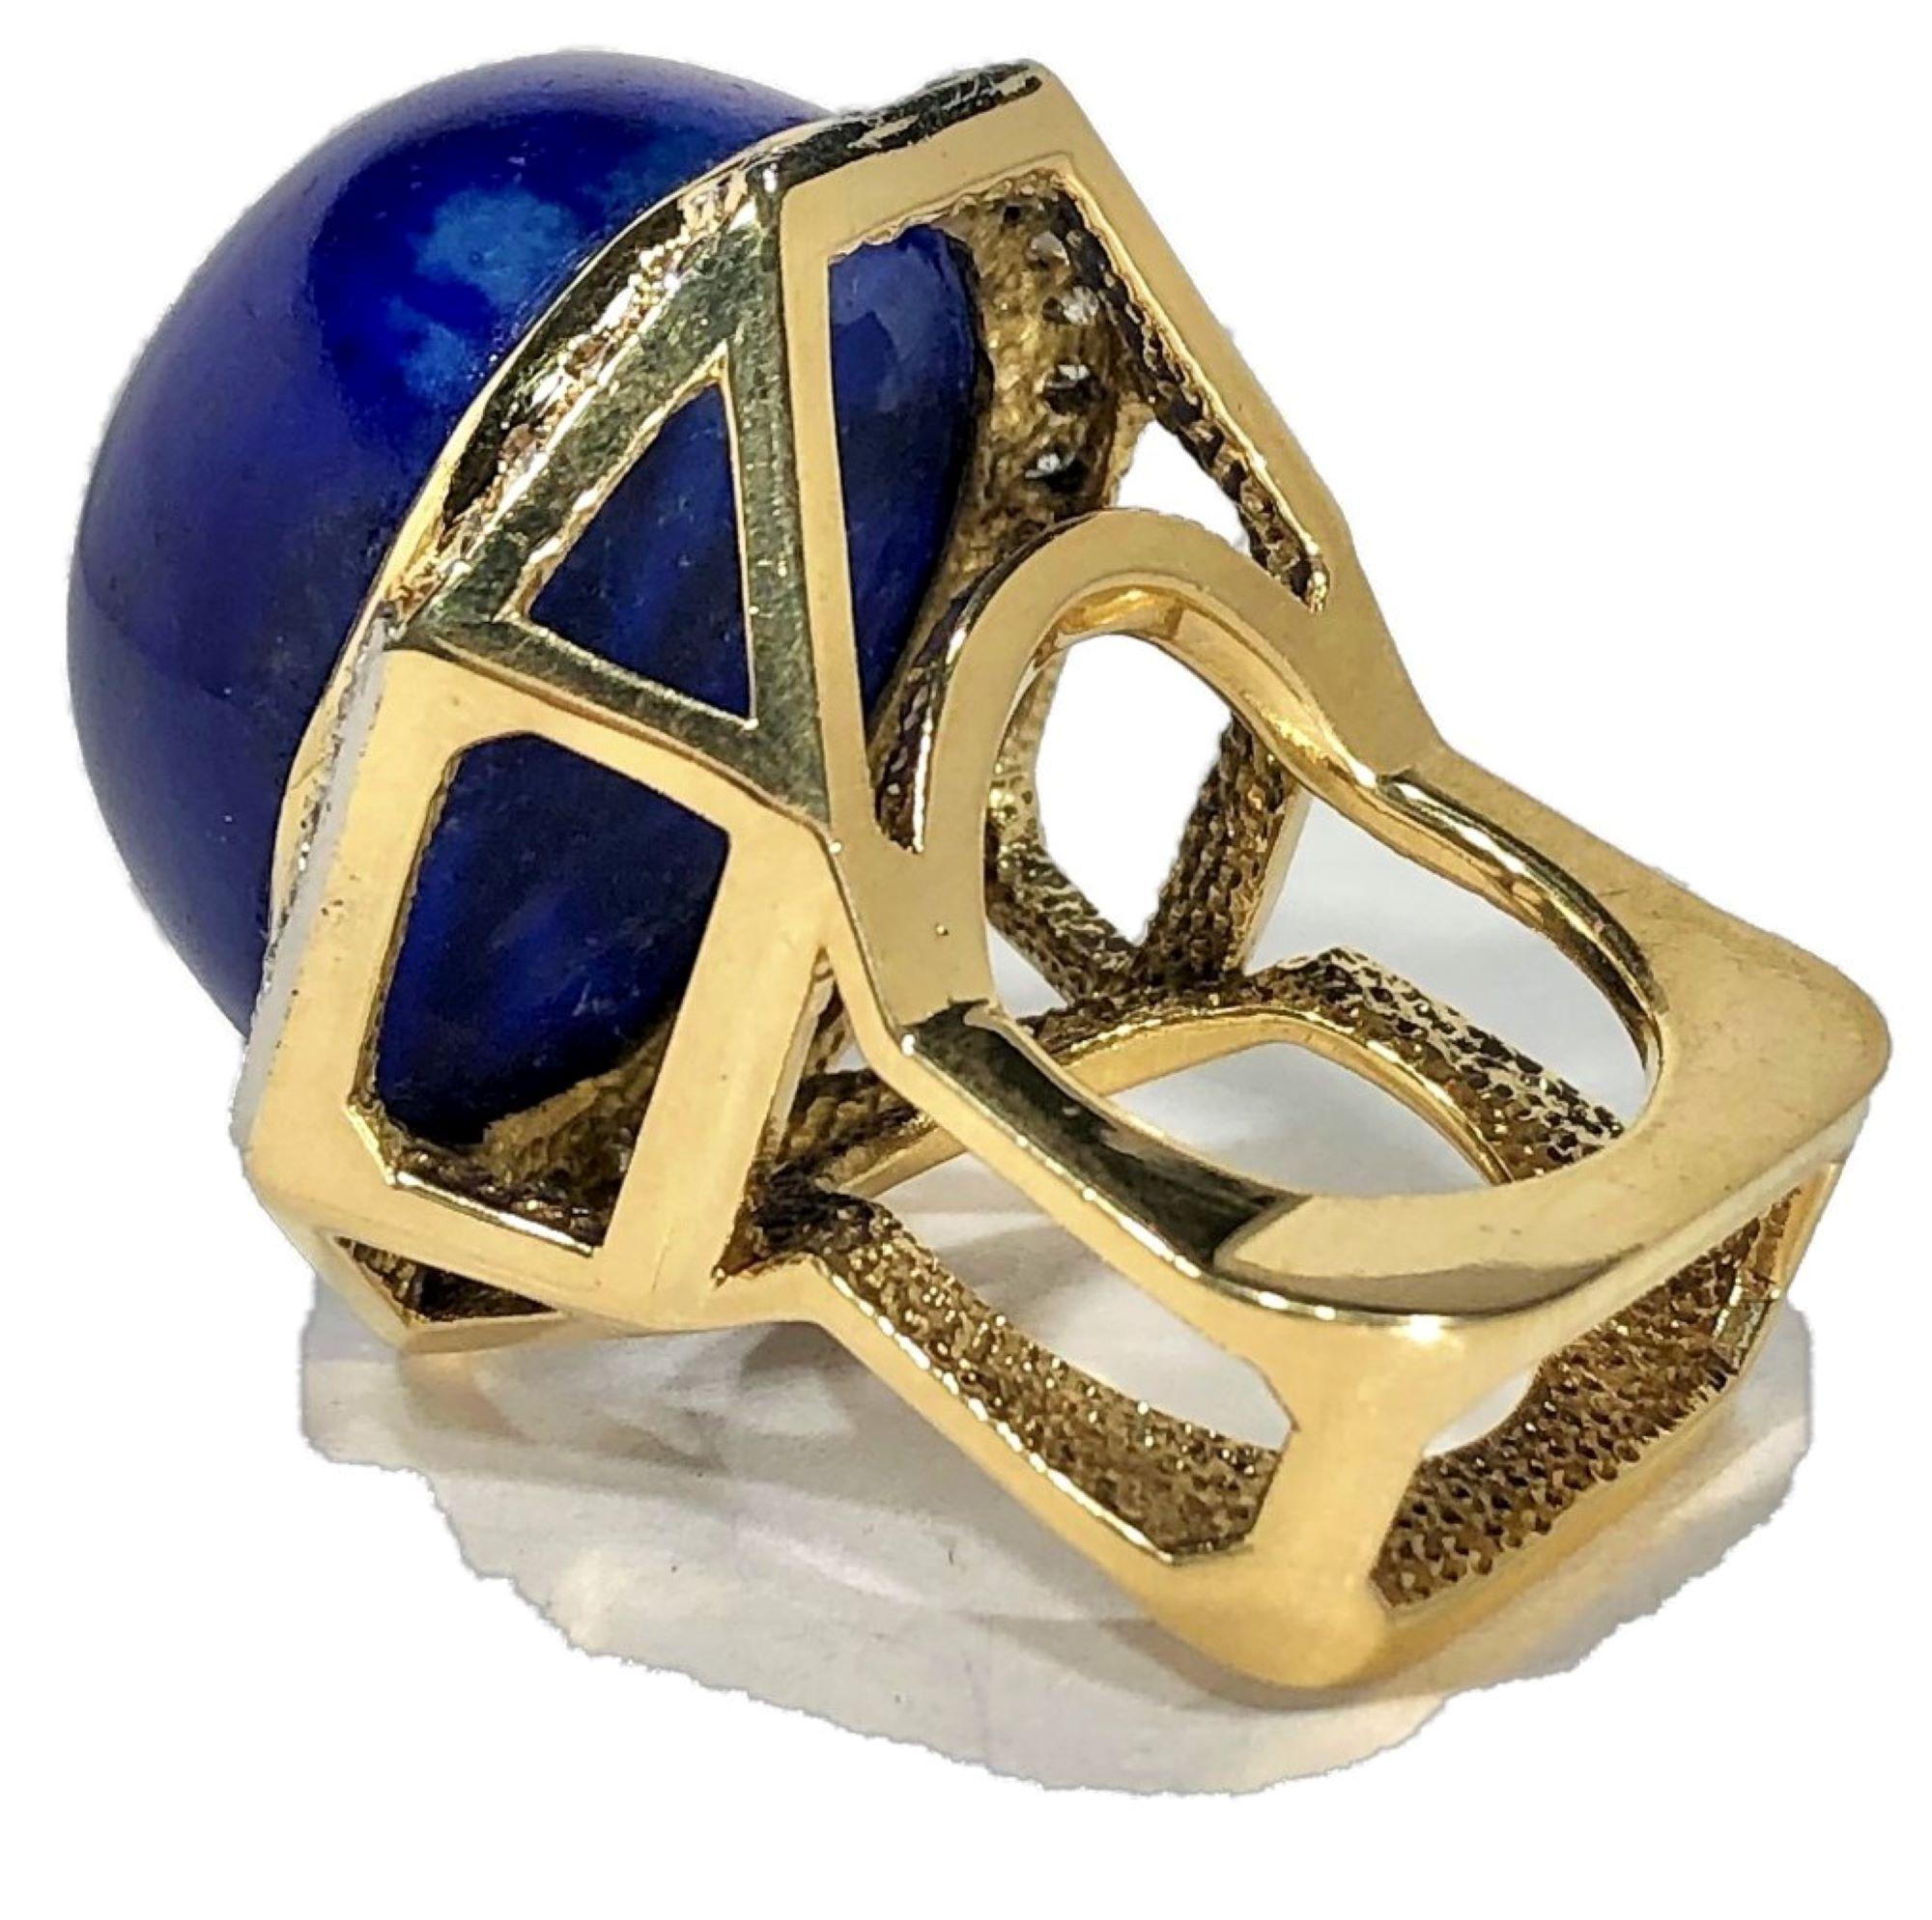 Massive Gold Cocktail Ring with 86 Carat Lapis-Lazuli Cabochon and Diamonds 1